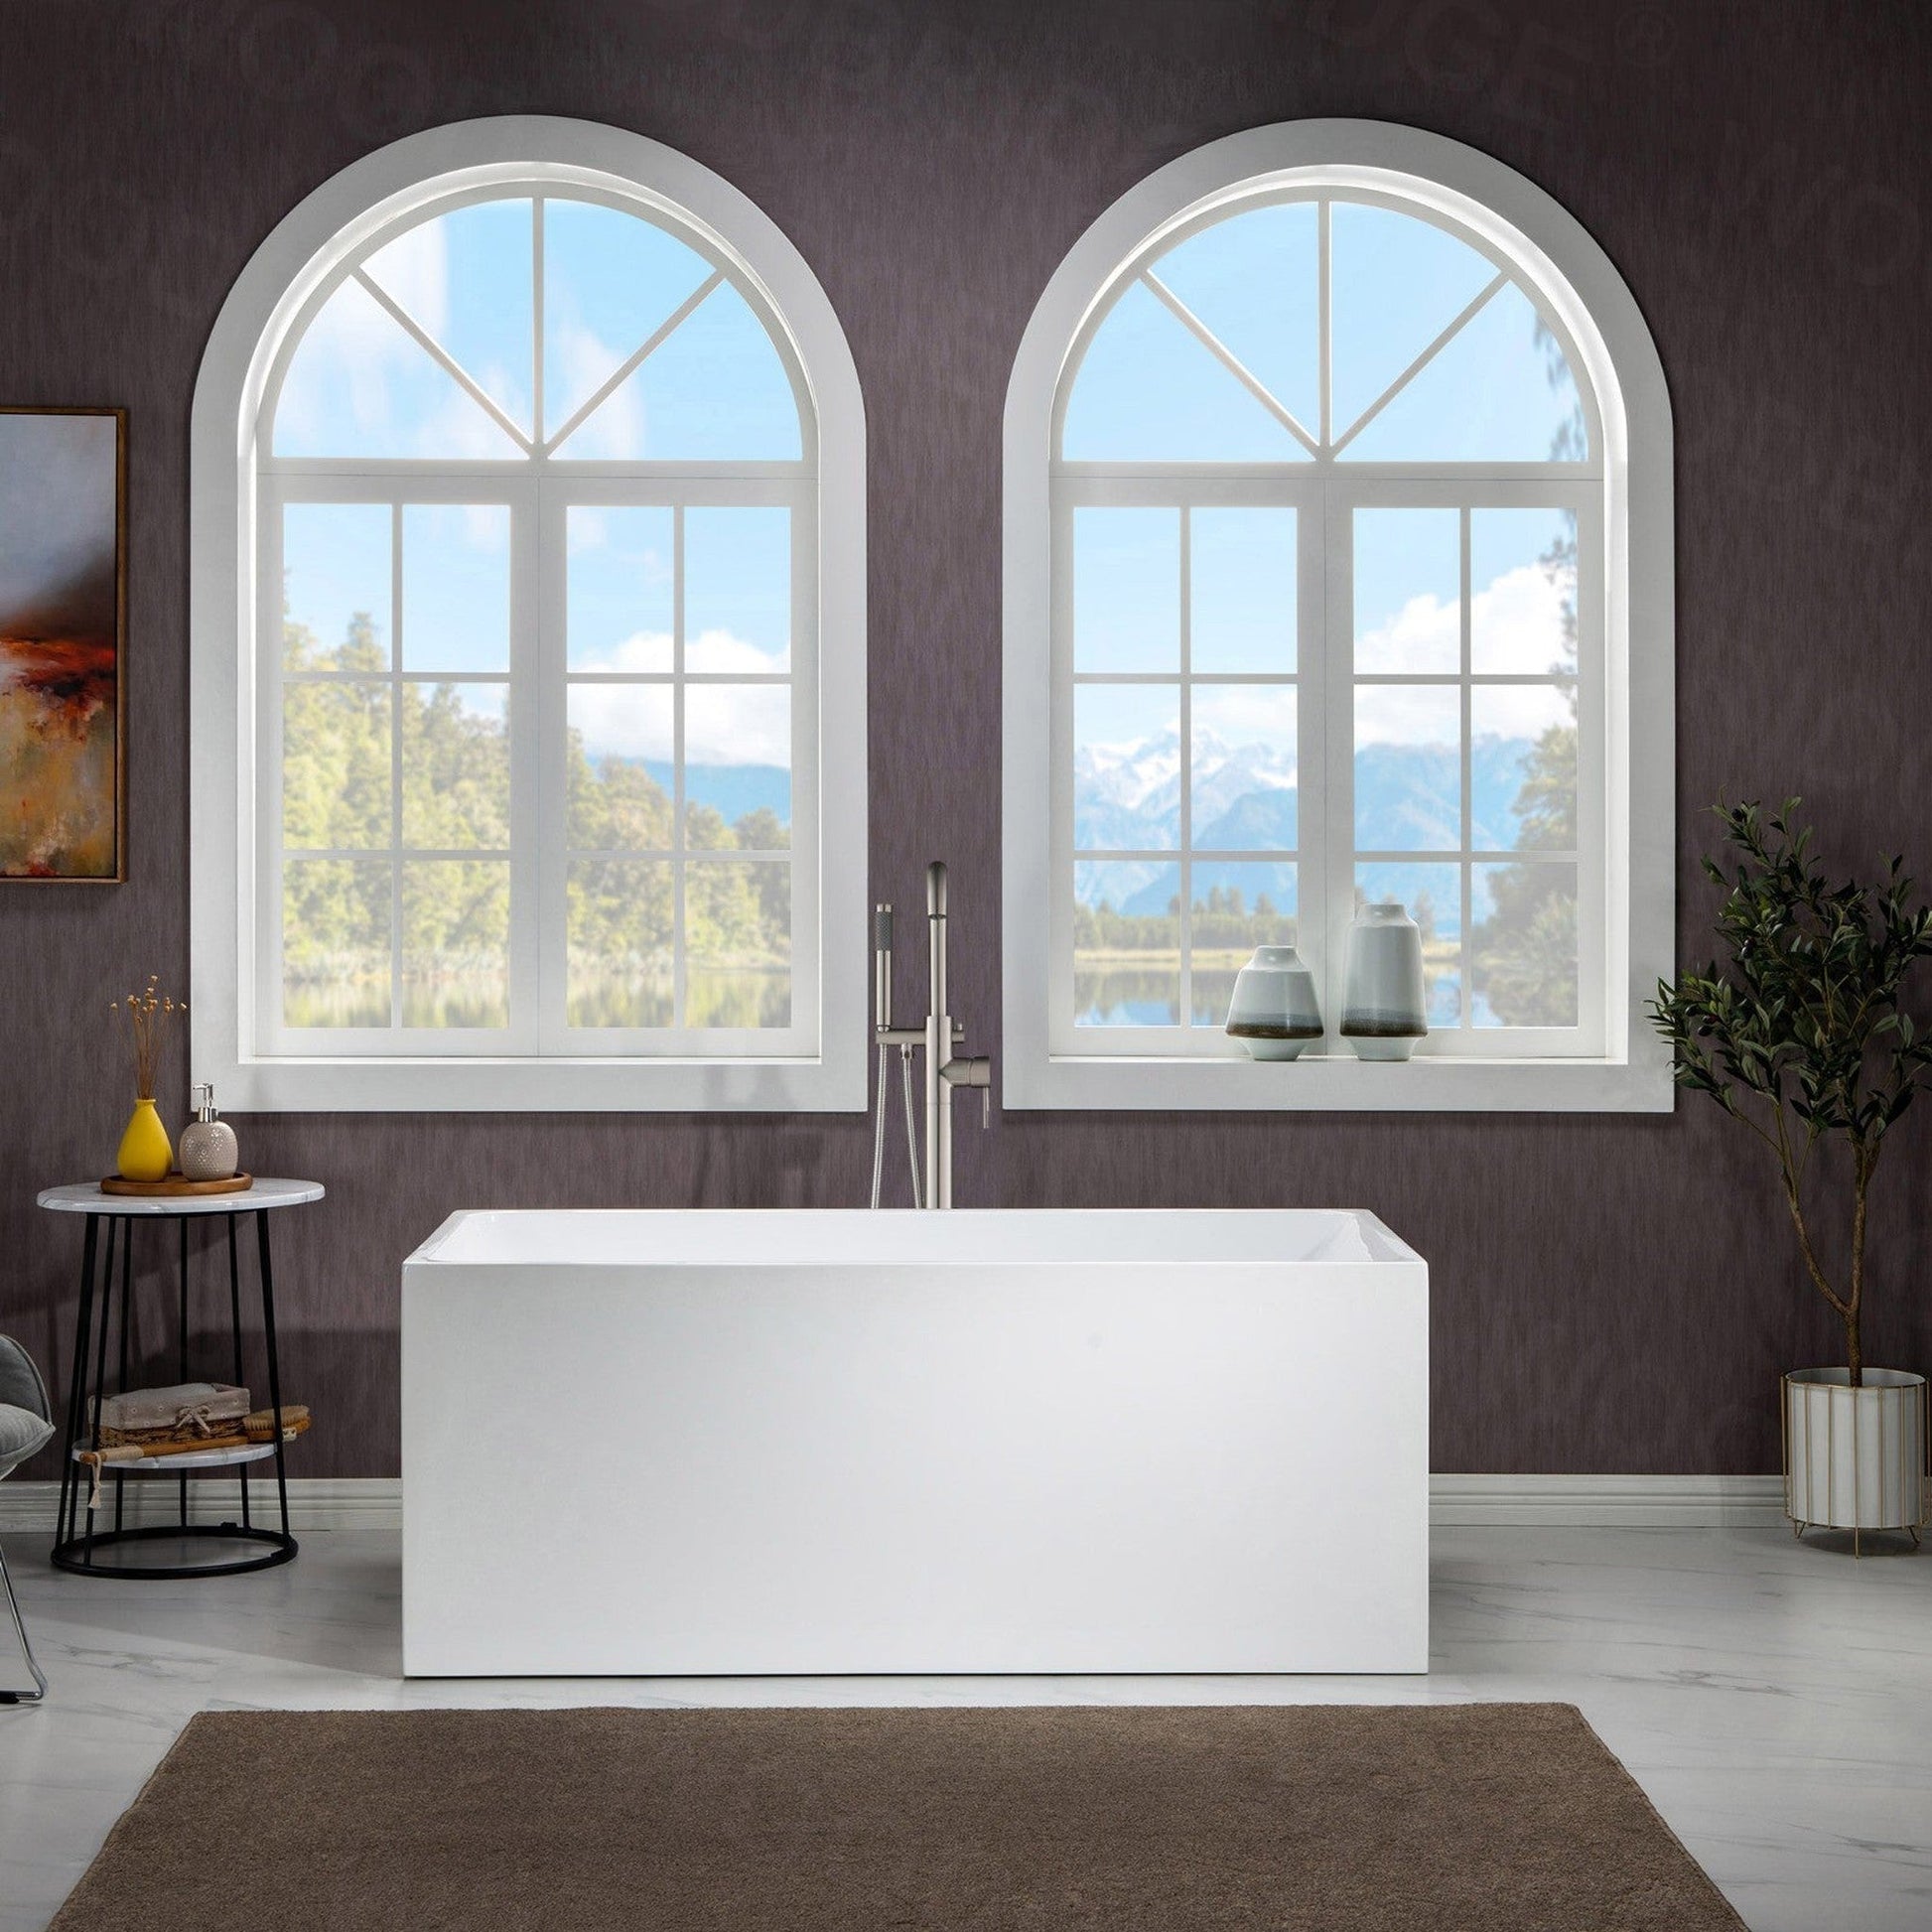 WoodBridge B-0085 59" White Acrylic Freestanding Soaking Bathtub With Brushed Nickel Drain, Overflow, F0070BNVT Tub Filler and Caddy Tray